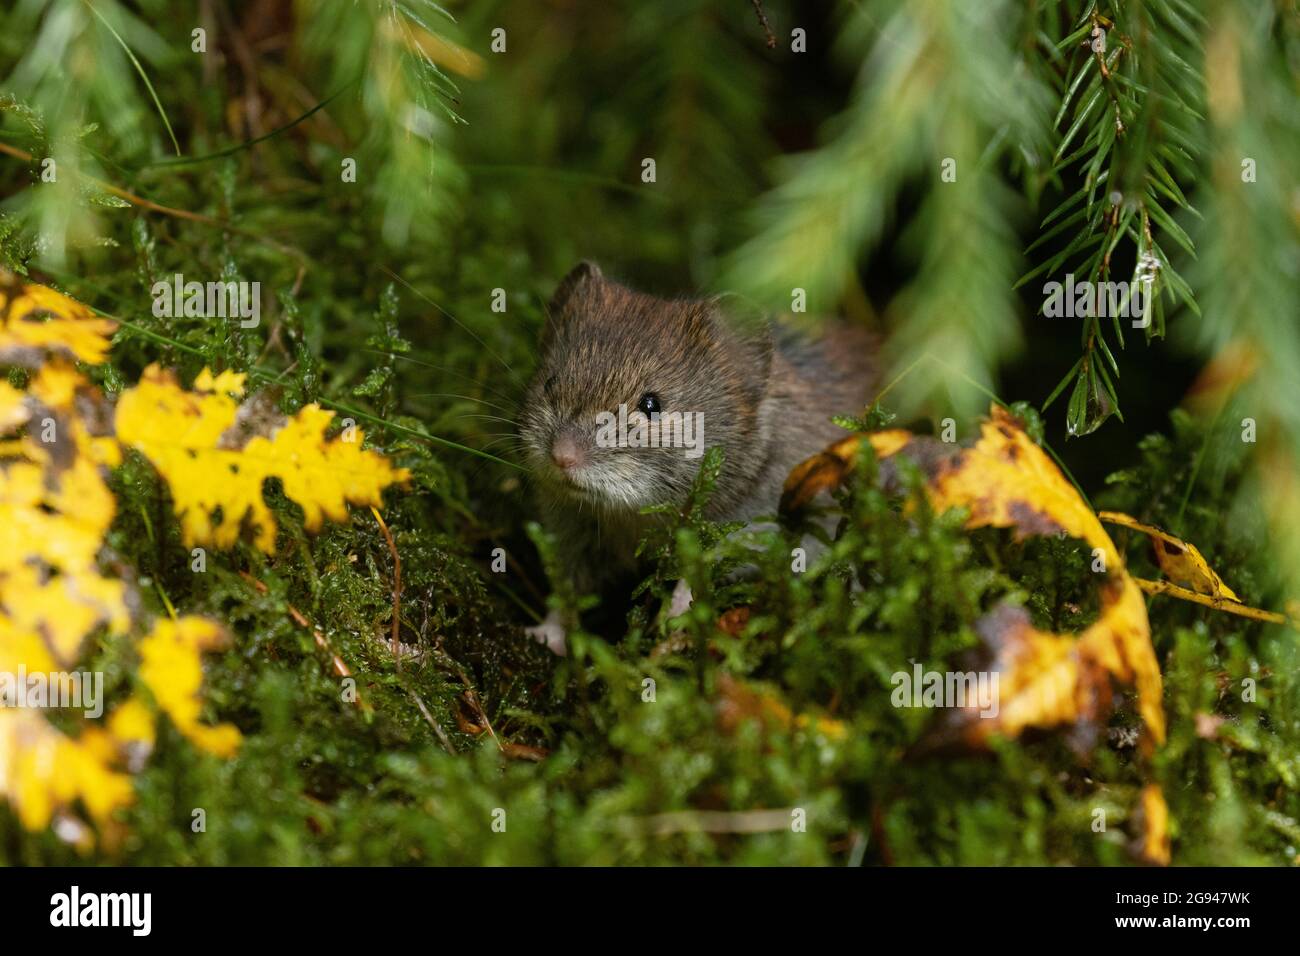 Small and adorable rodent Bank vole, Myodes glareolus in autumnal forest in Estonia, Northern Europe. Stock Photo